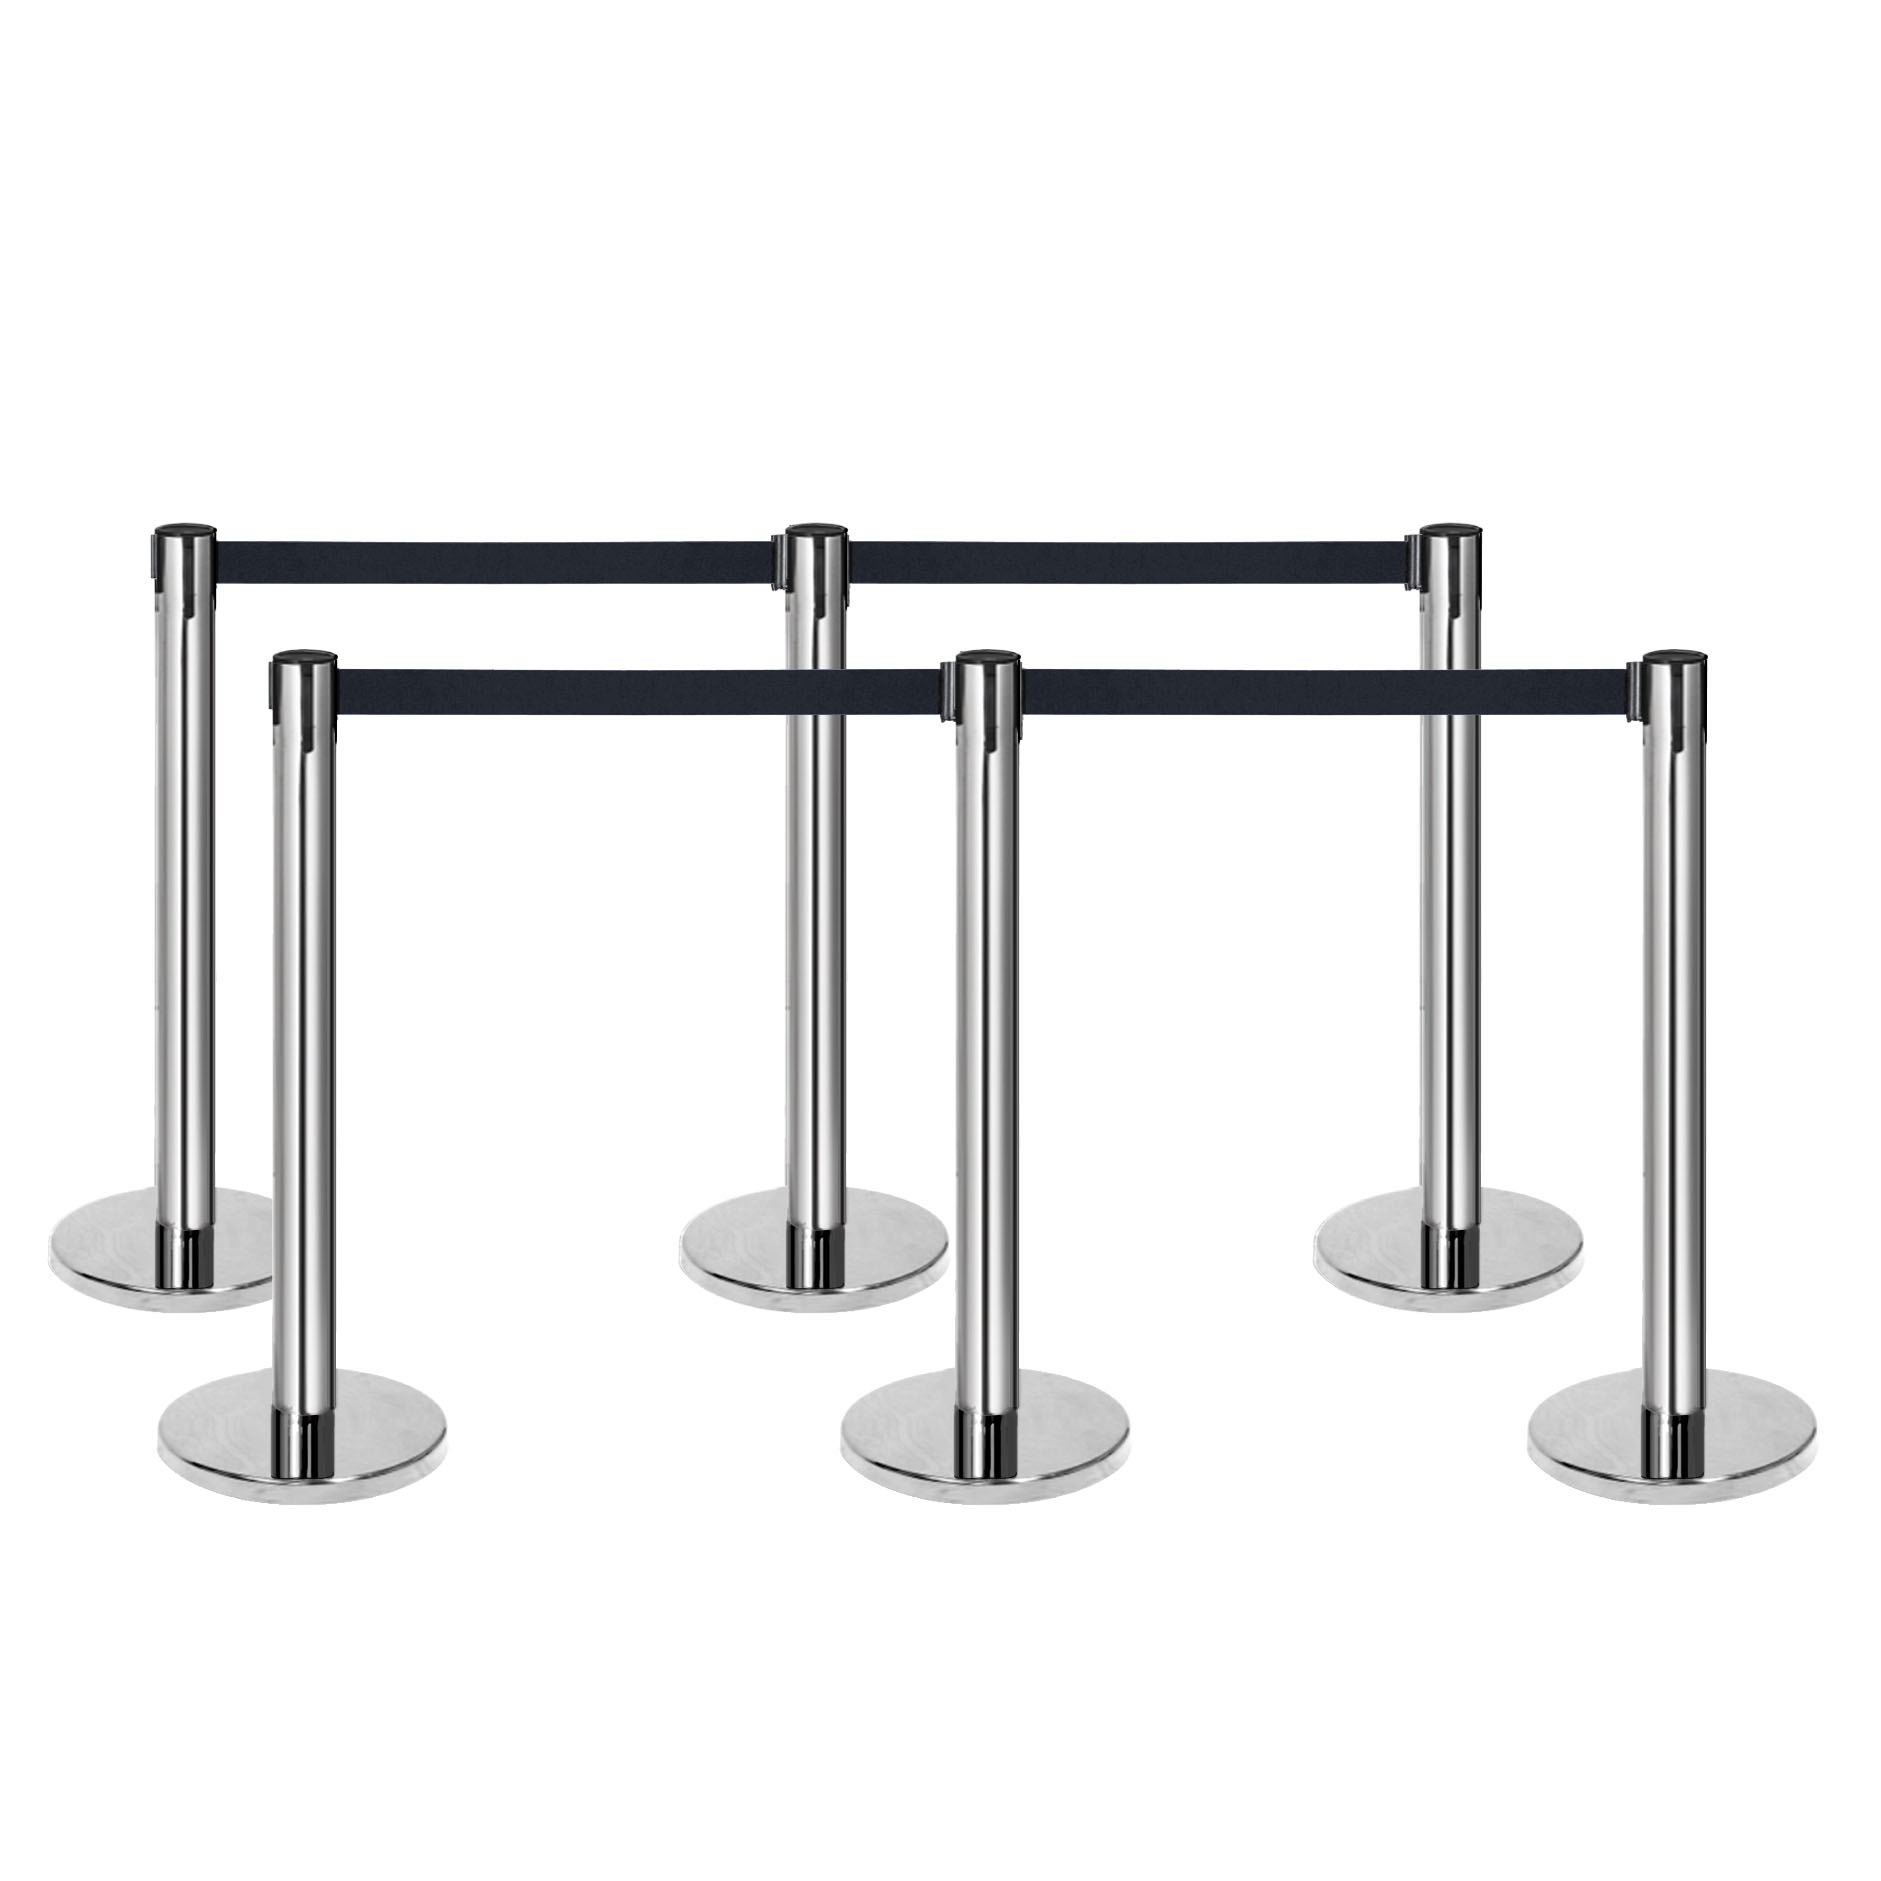 Set of Two Tensator Retractable Barrier Posts S/Steel Stanchions 7'6" Strap 